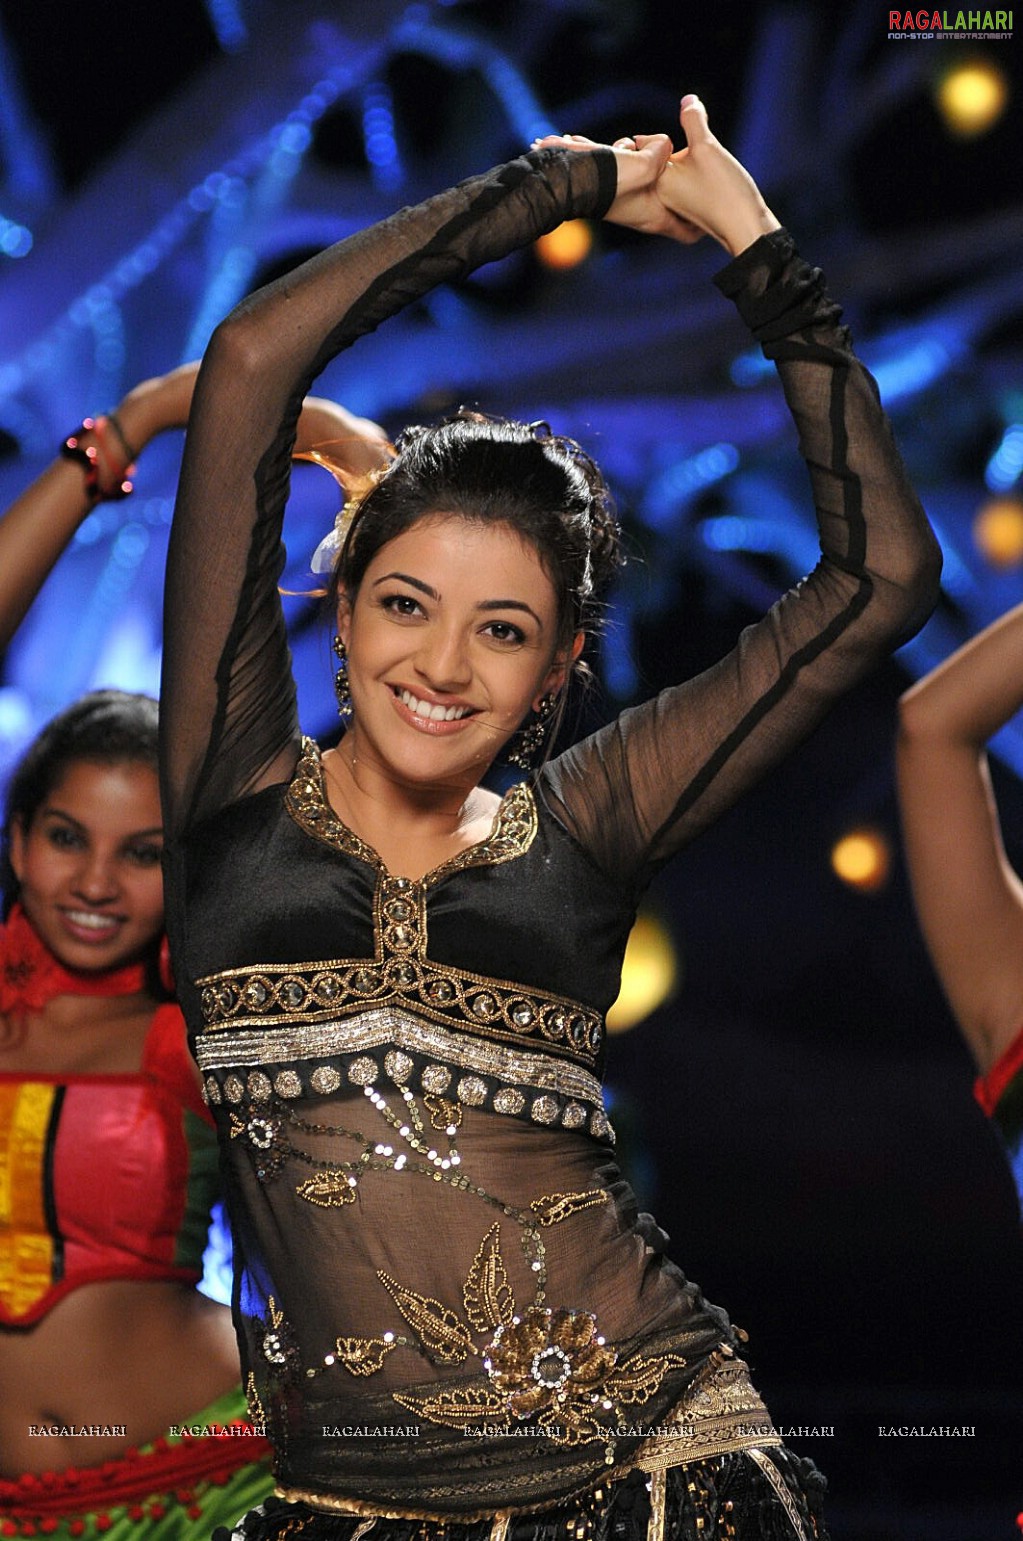 Kajal Agarwal in Sleeveless Top and Shorts in 'Dhada' - Photo Gallery